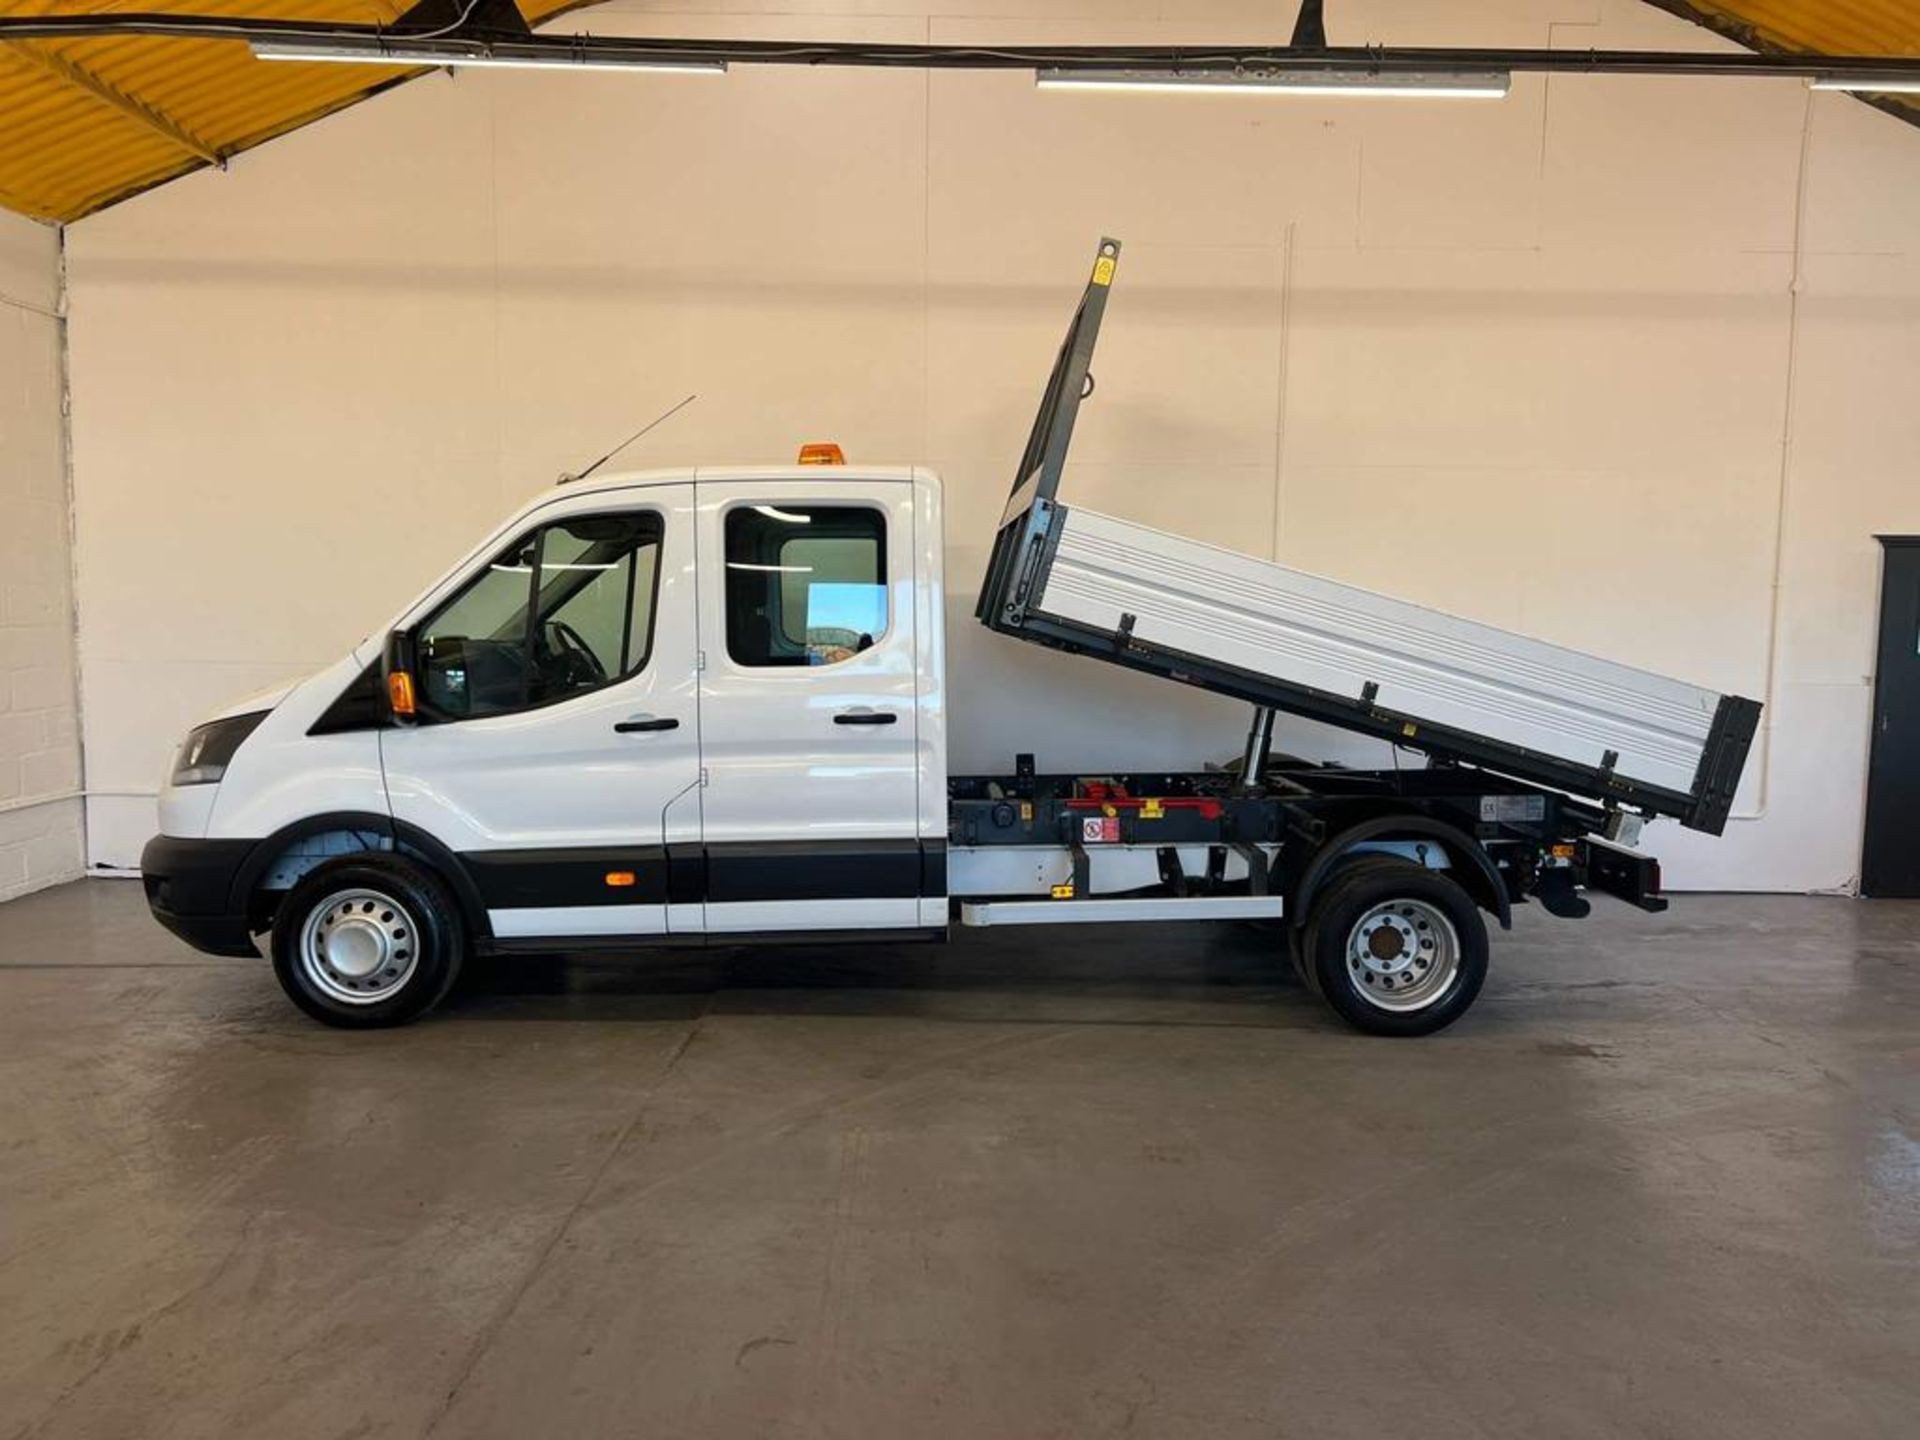 (RESERVE MET)Ford Transit 350 2.0 TDCI Double Cab Tipper 2018 18 Reg - DRW - - 1 Owner From New 73K